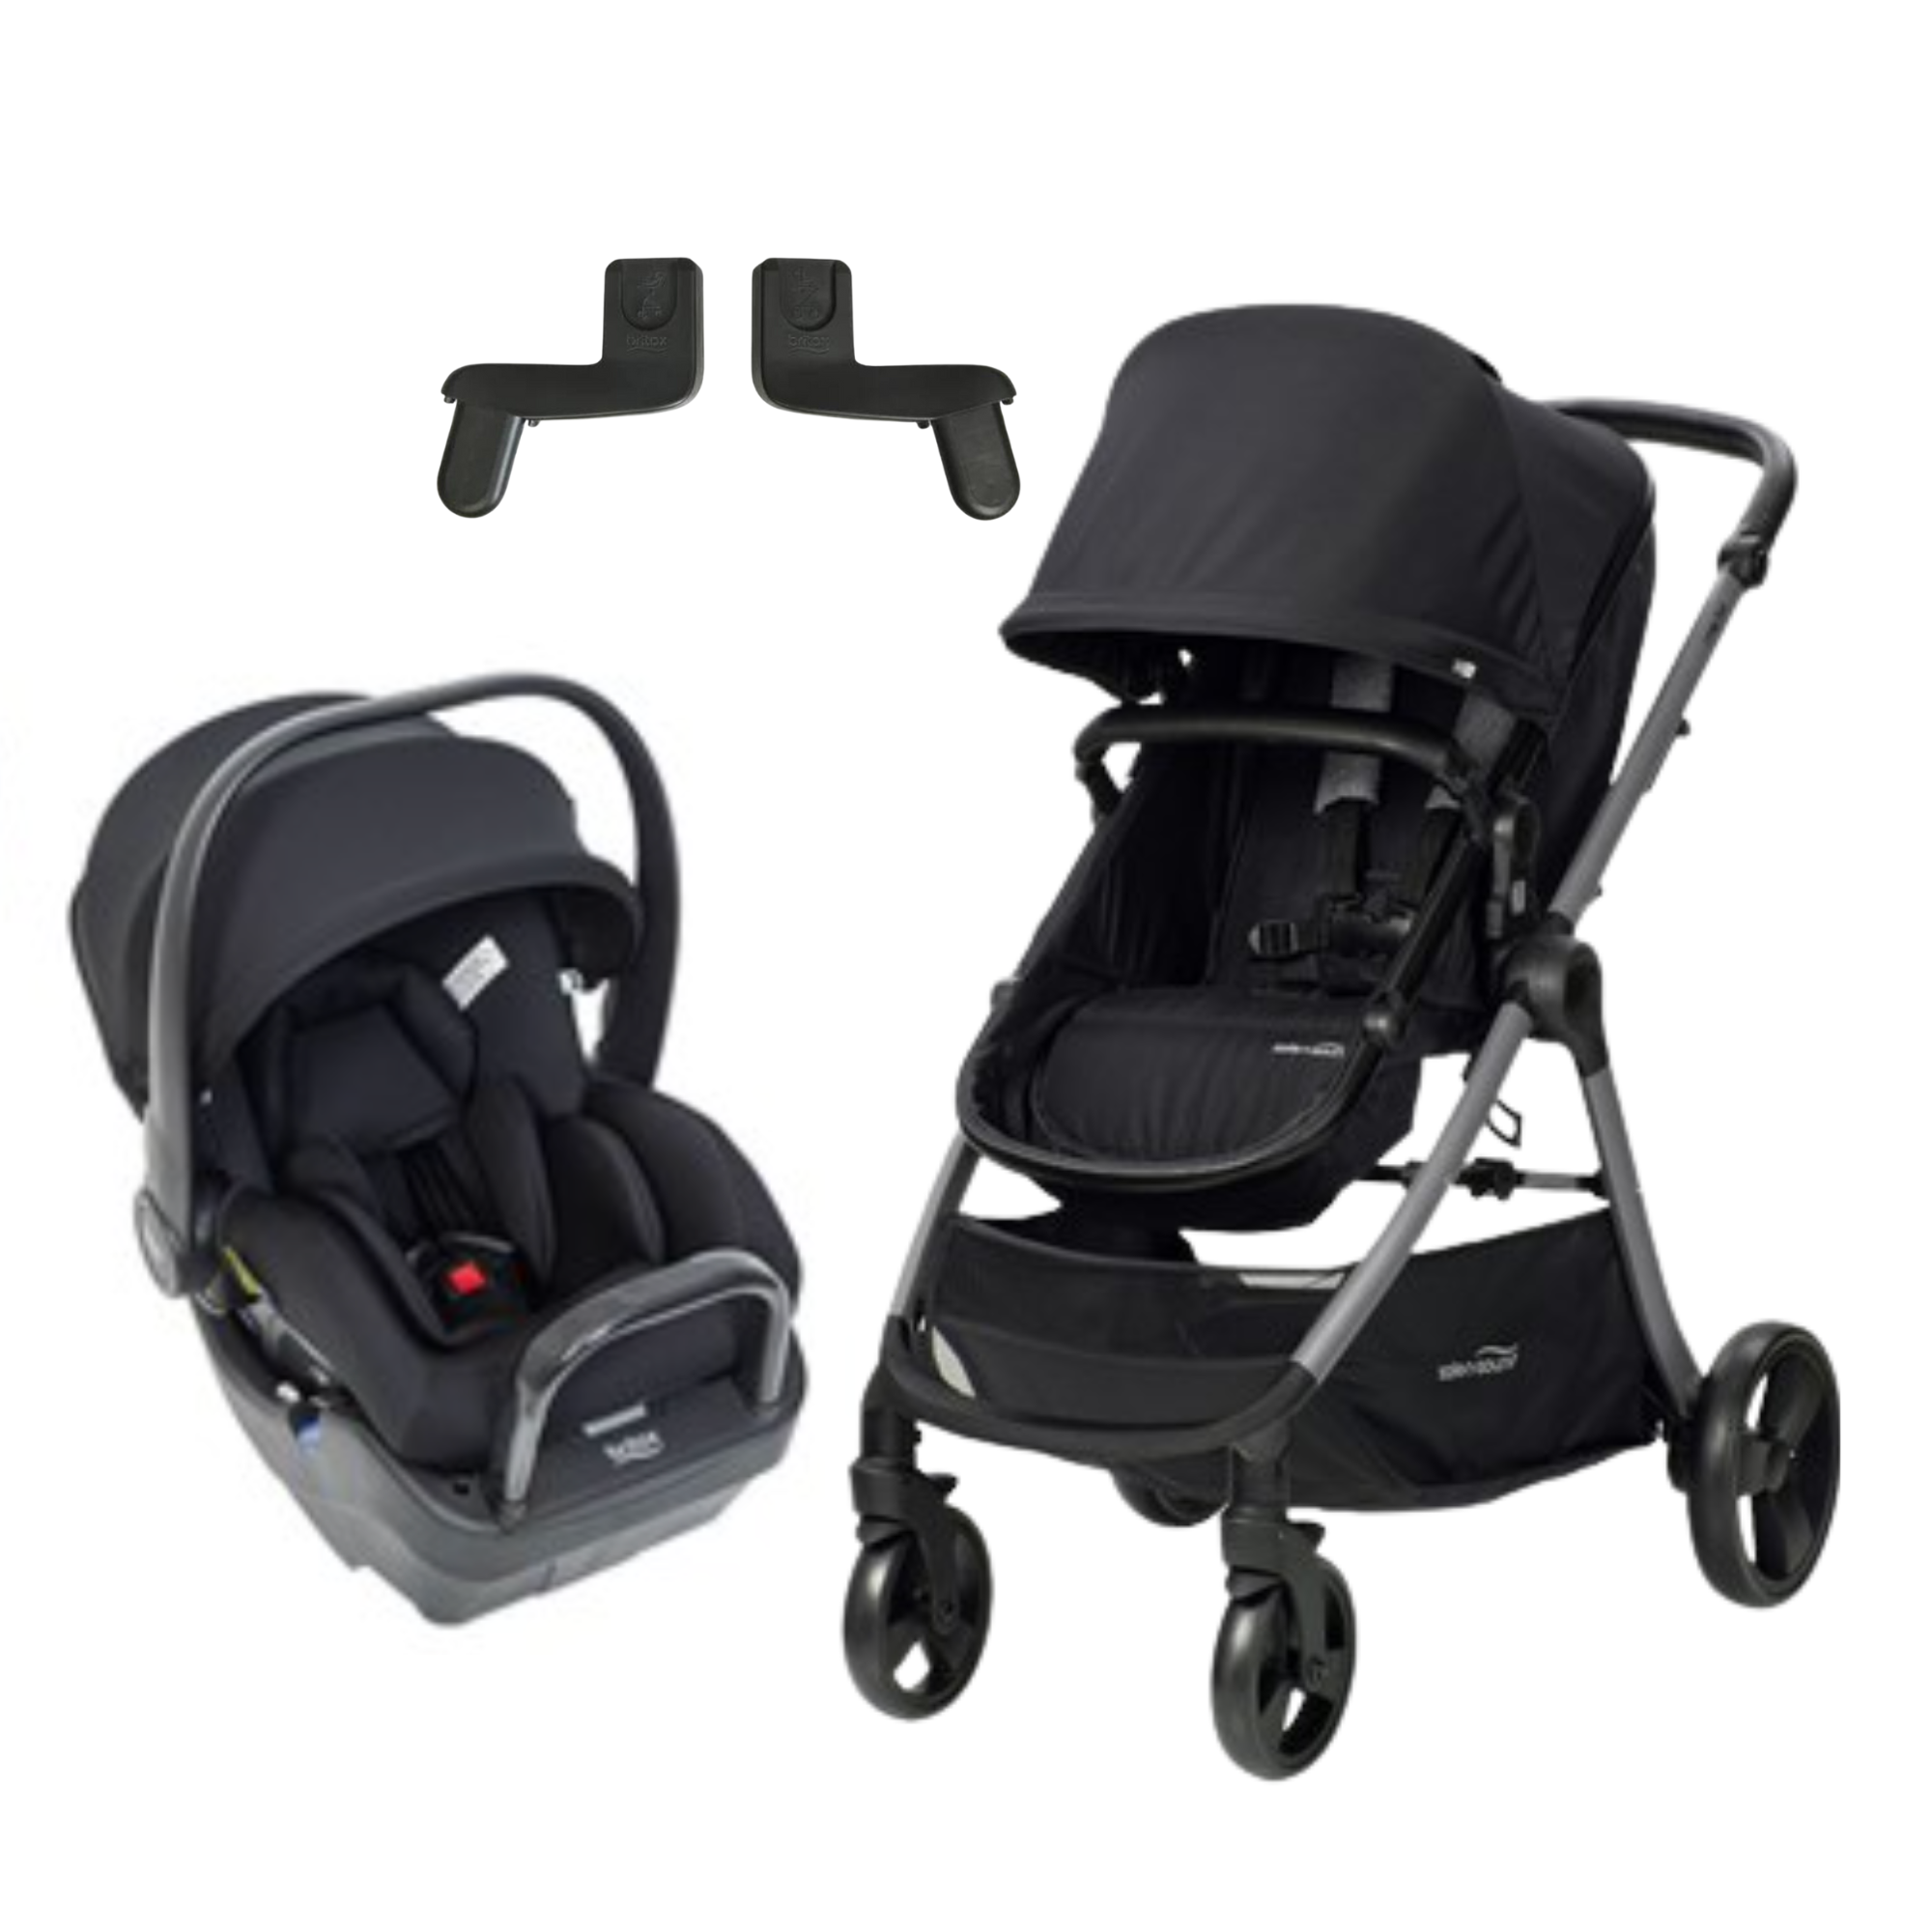 Safe-n-Sound Cosy Lux Travel System